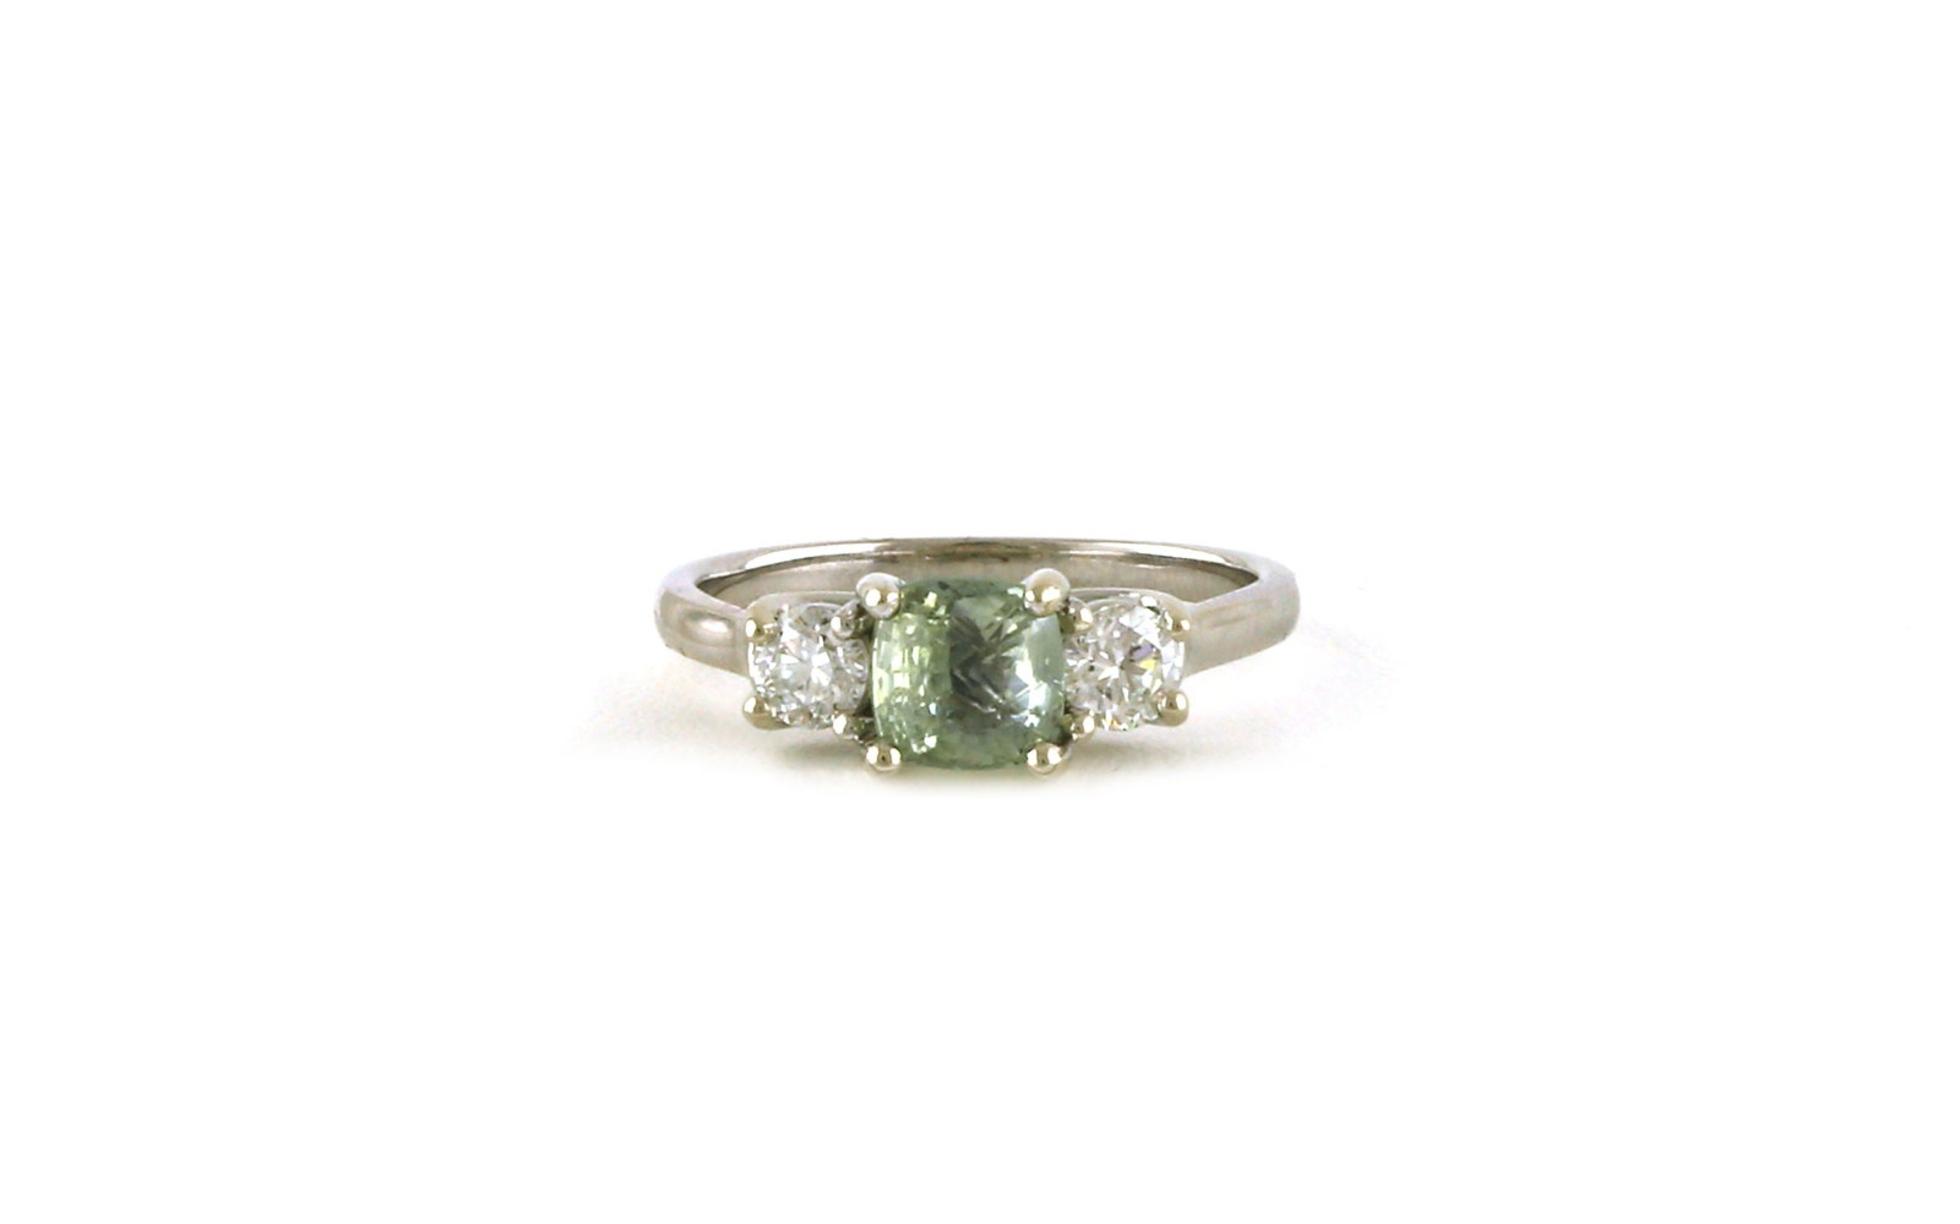 3-Stone Cushion-cut Green Montana Sapphire and Diamond Ring in White Gold (1.83cts TWT)